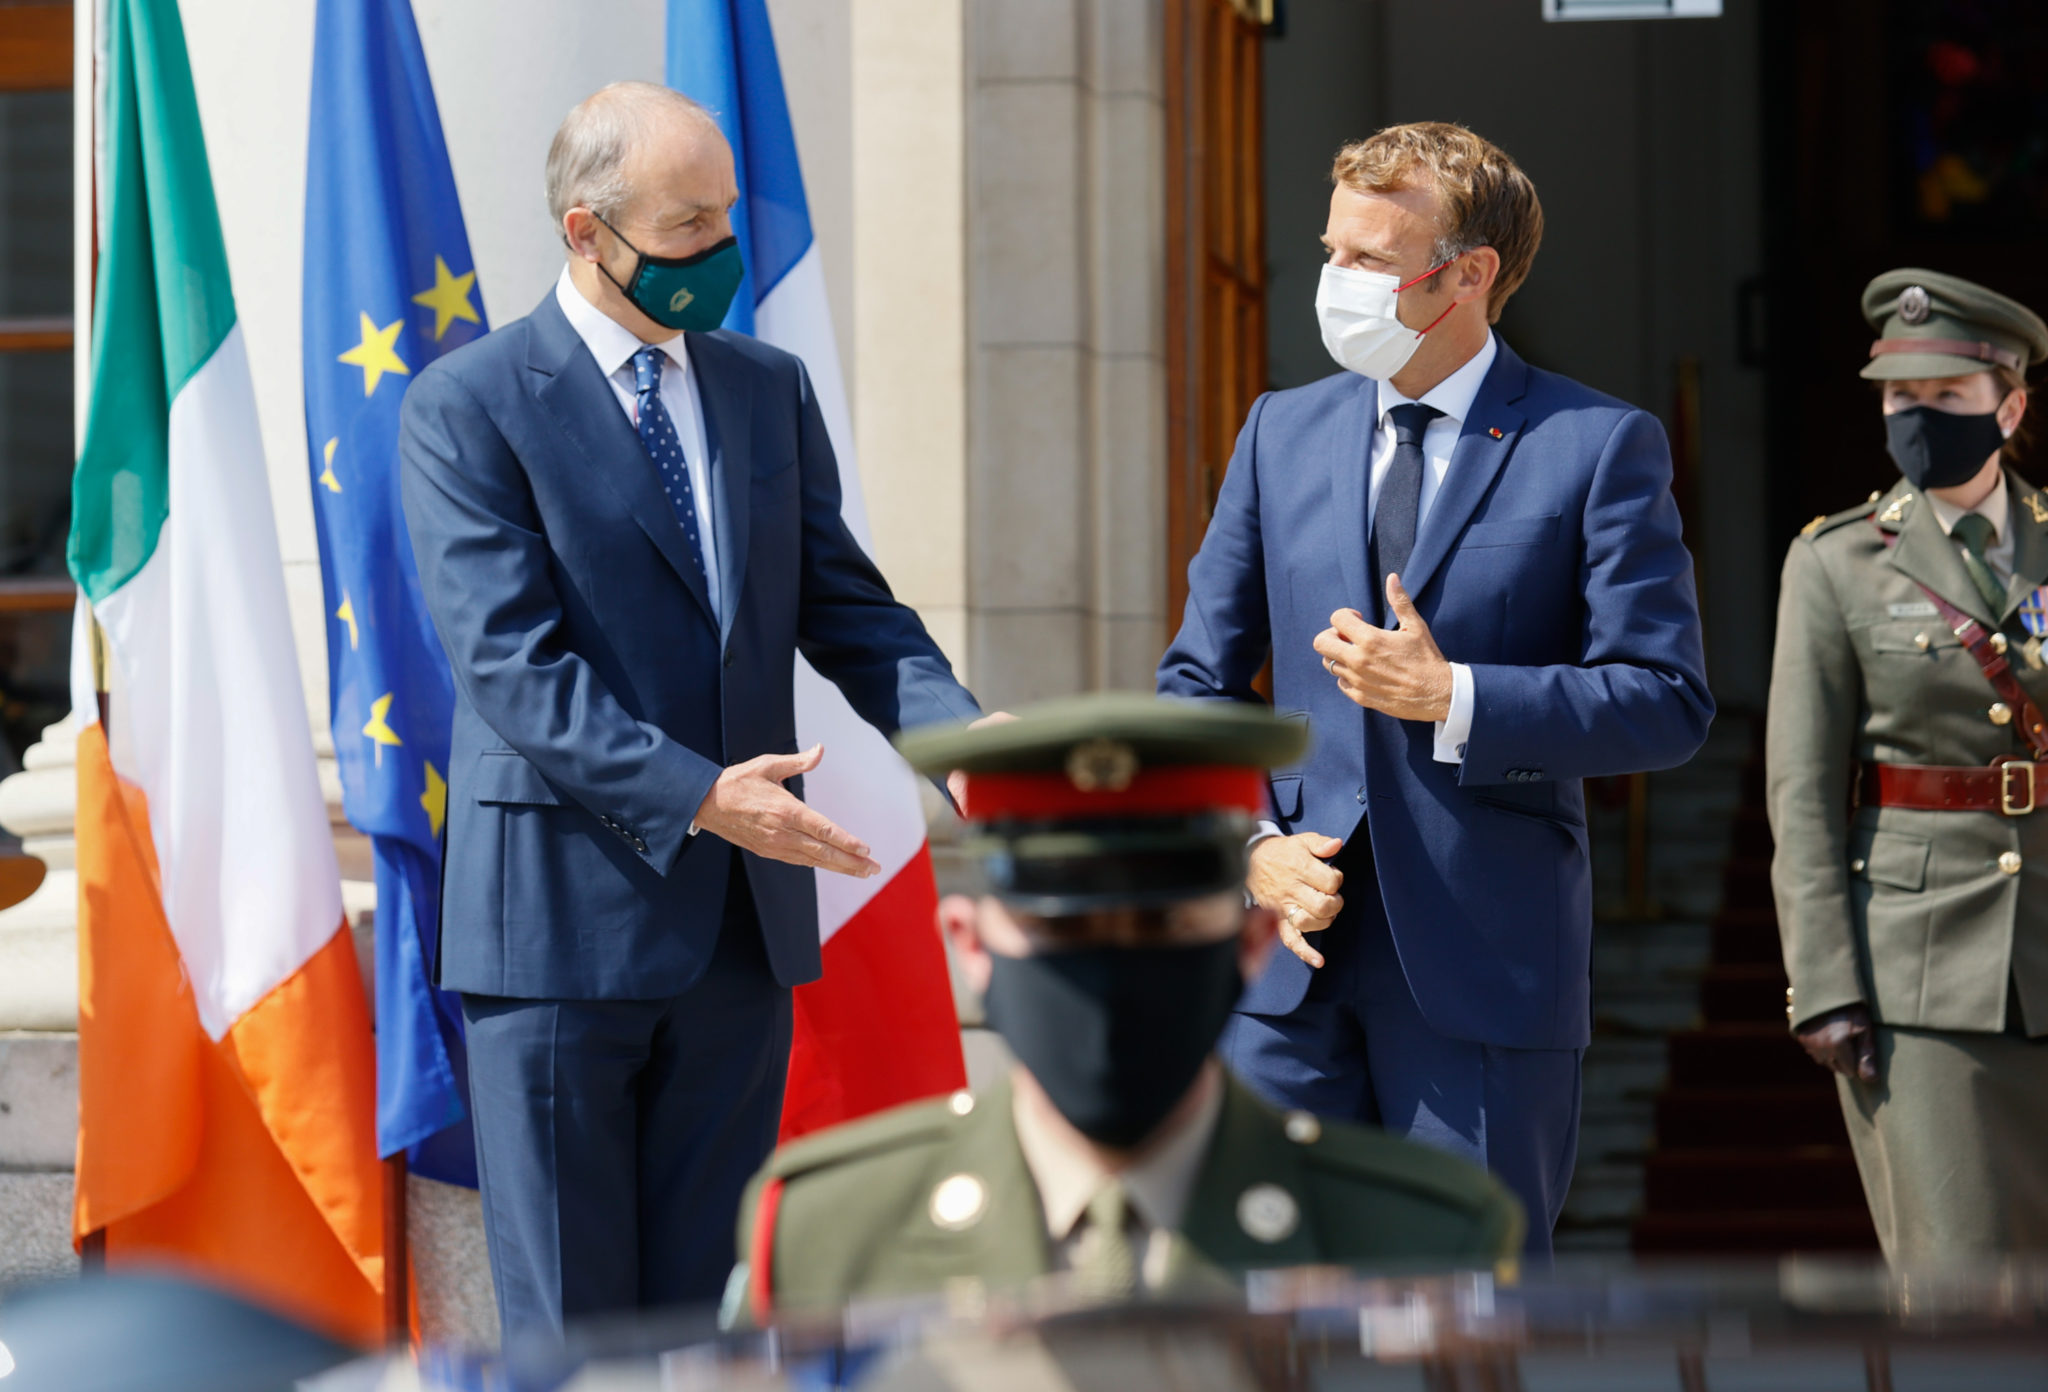 Handout photo of Taoiseach Micheal Martin (left) greeting French President Emmanuel Macron at Government Buildings in Dublin on August 26th, 2021.